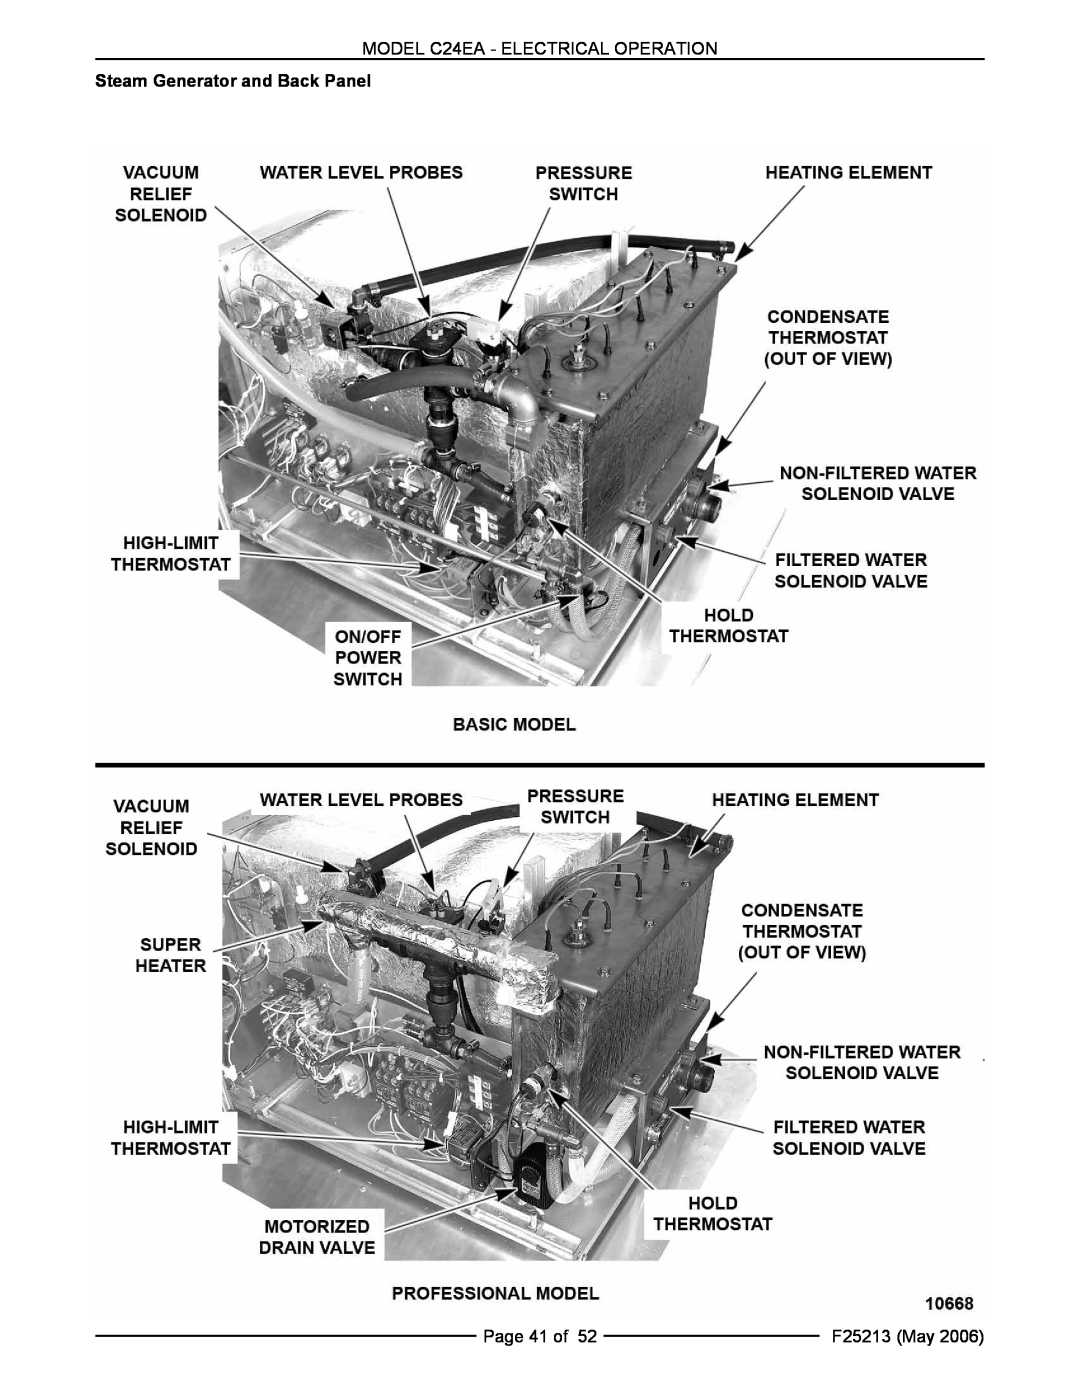 Vulcan-Hart C24EA5 480V PRO MODEL C24EA - ELECTRICAL OPERATION, Steam Generator and Back Panel, Page 41 of, F25213 May 